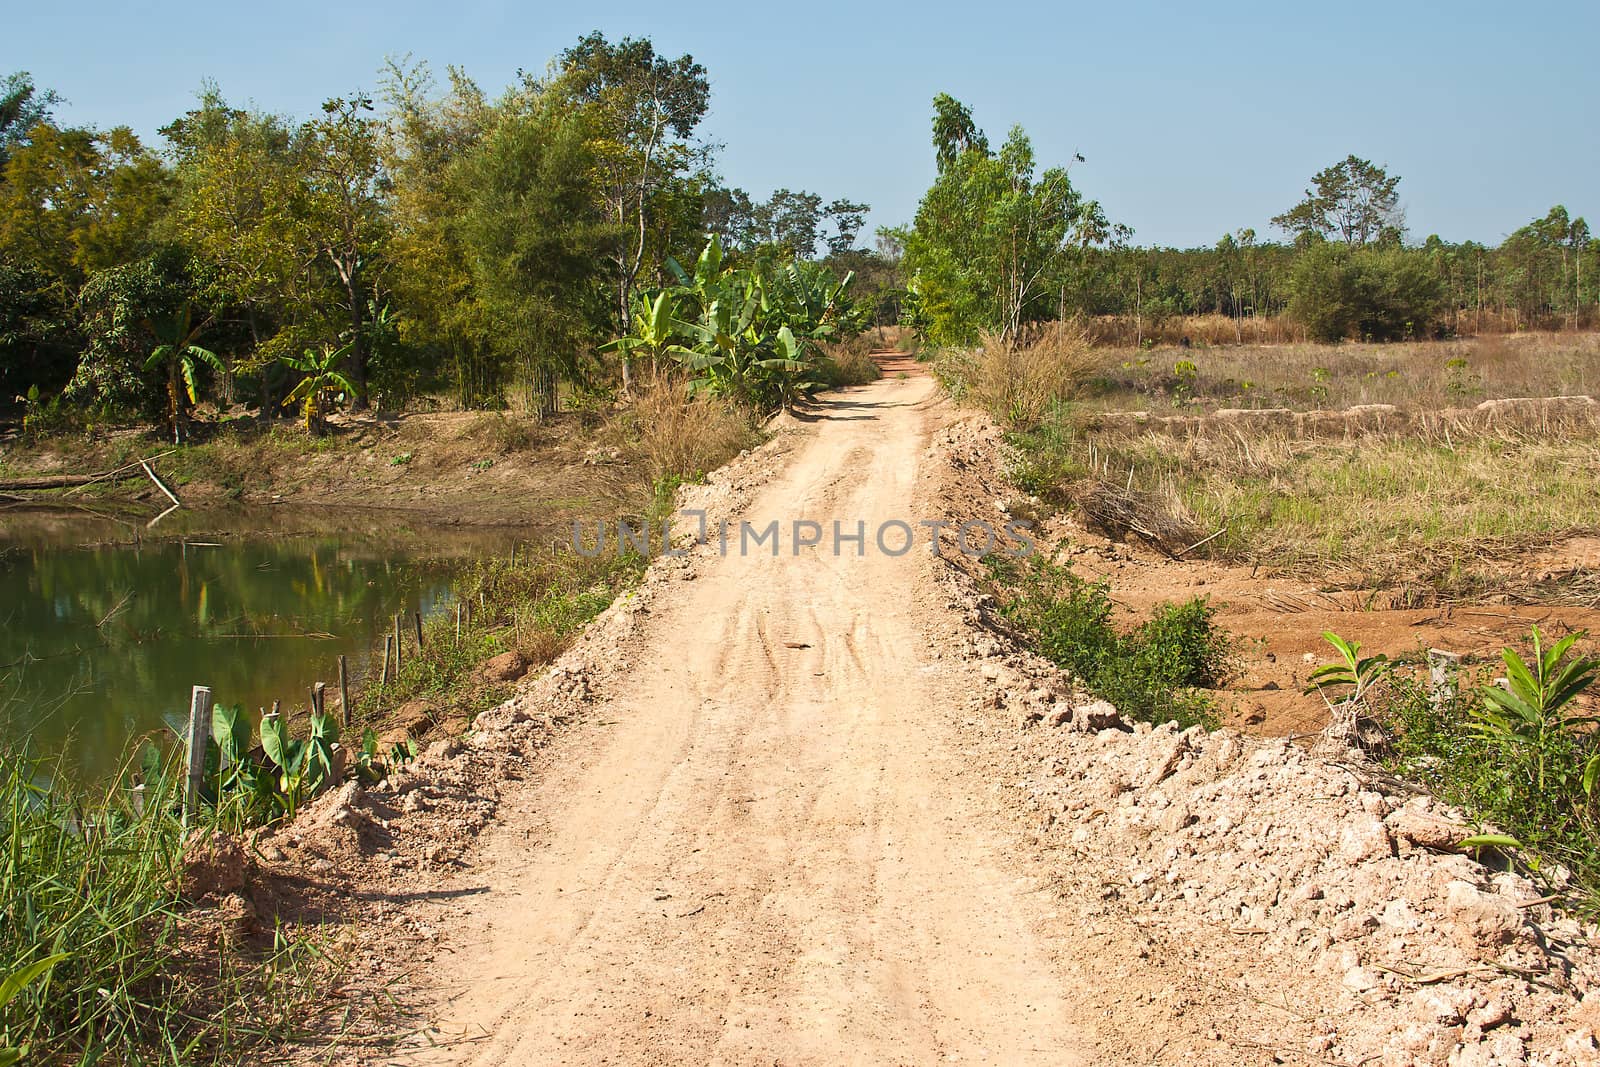 The dirt roads of rural villagers in Thailand.